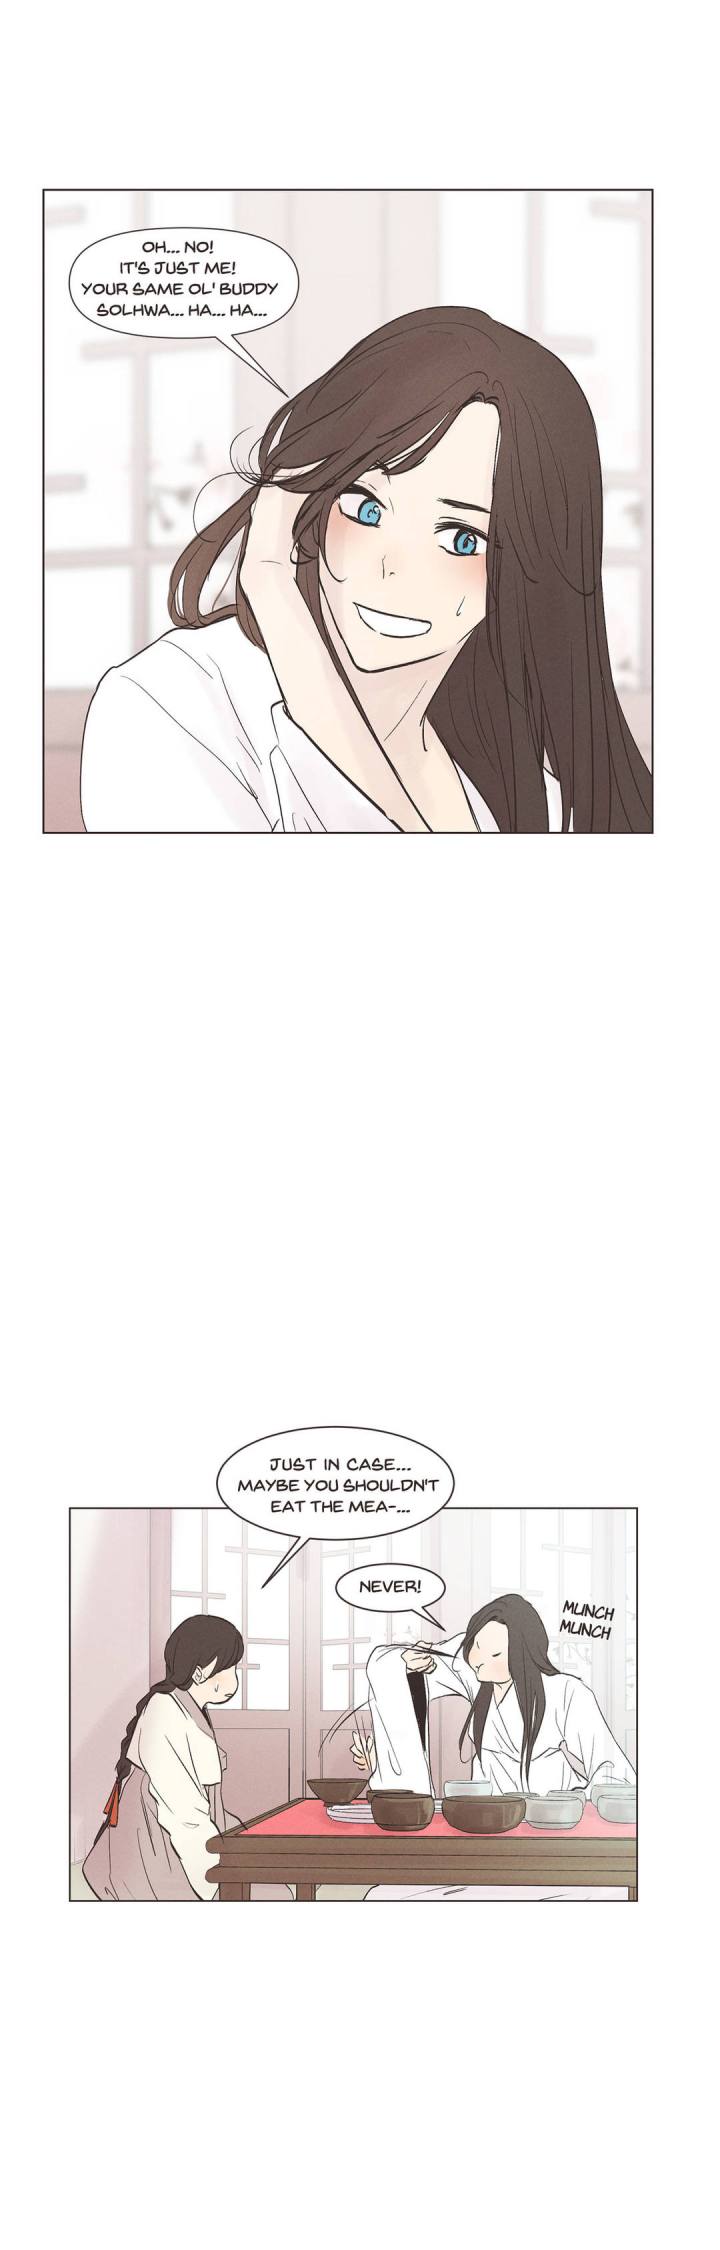 Ellin's Solhwa - Chapter 3 Page 15